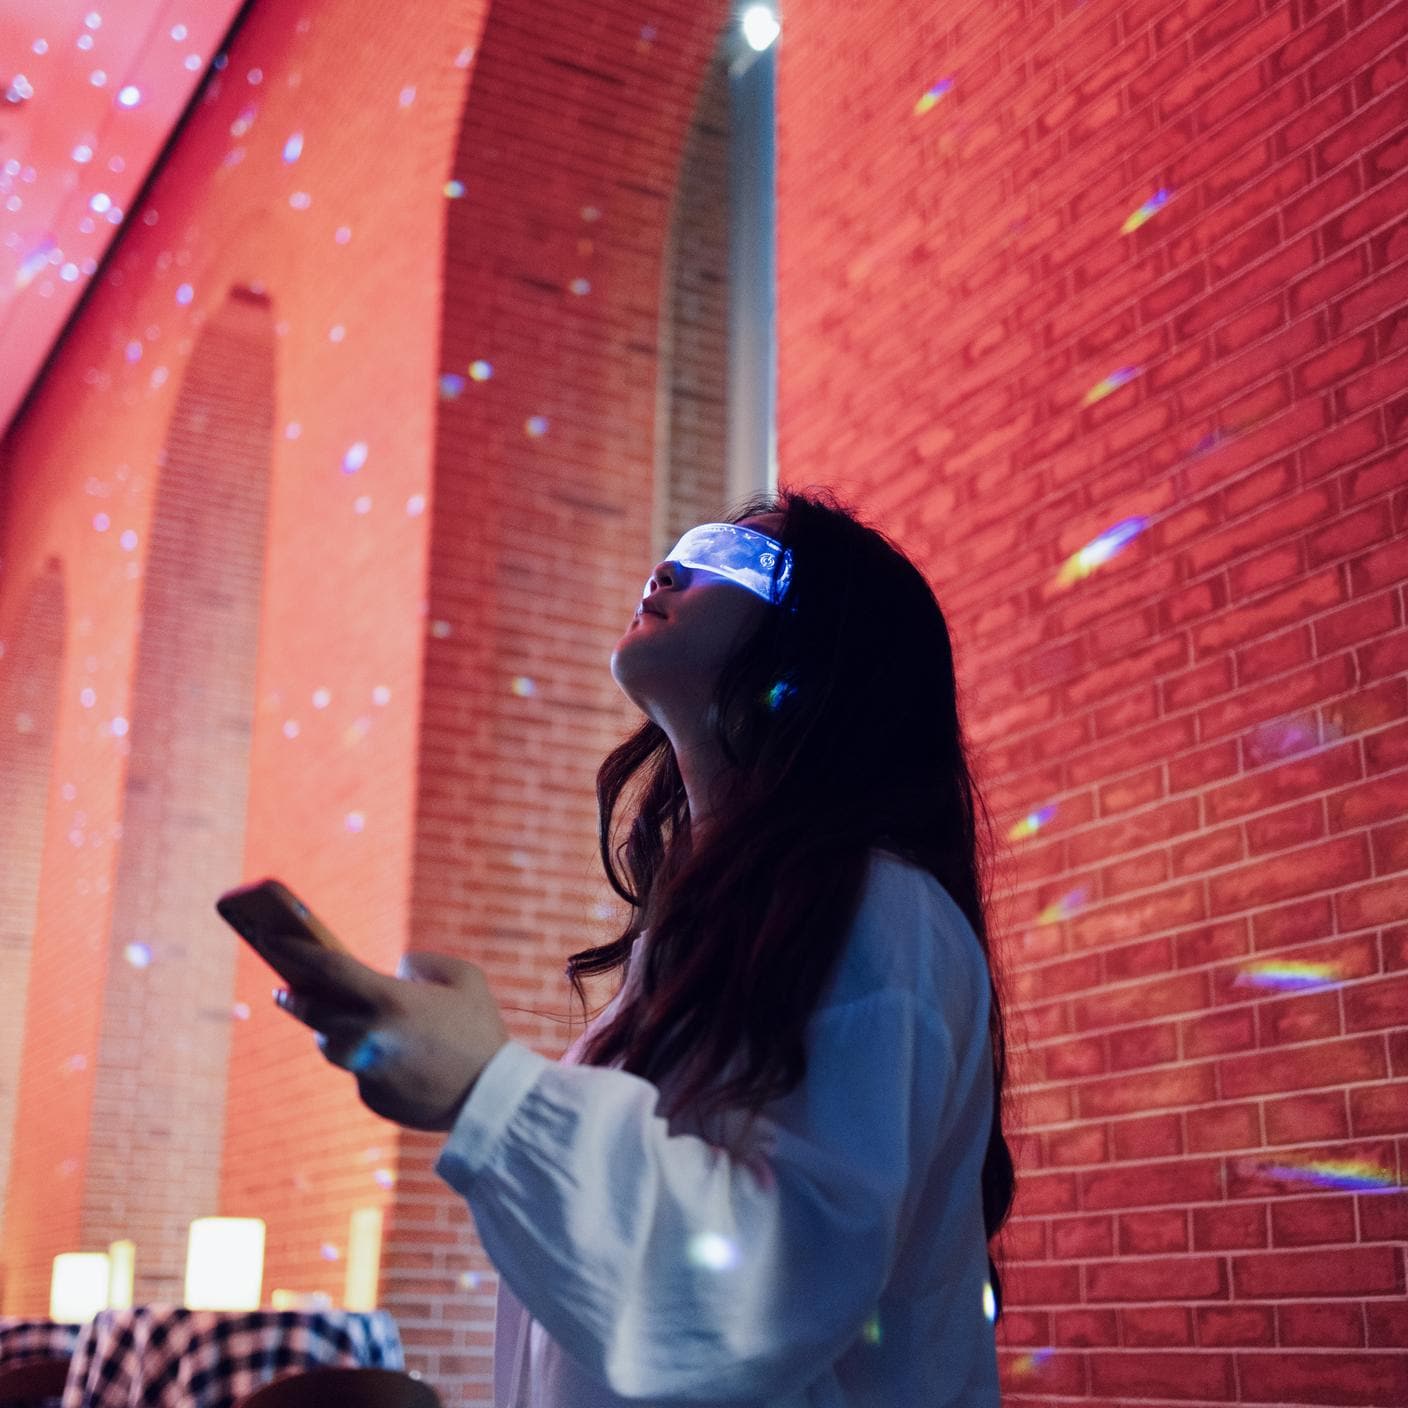 Woman wearing augmented reality glasses standing in night street using smartphone